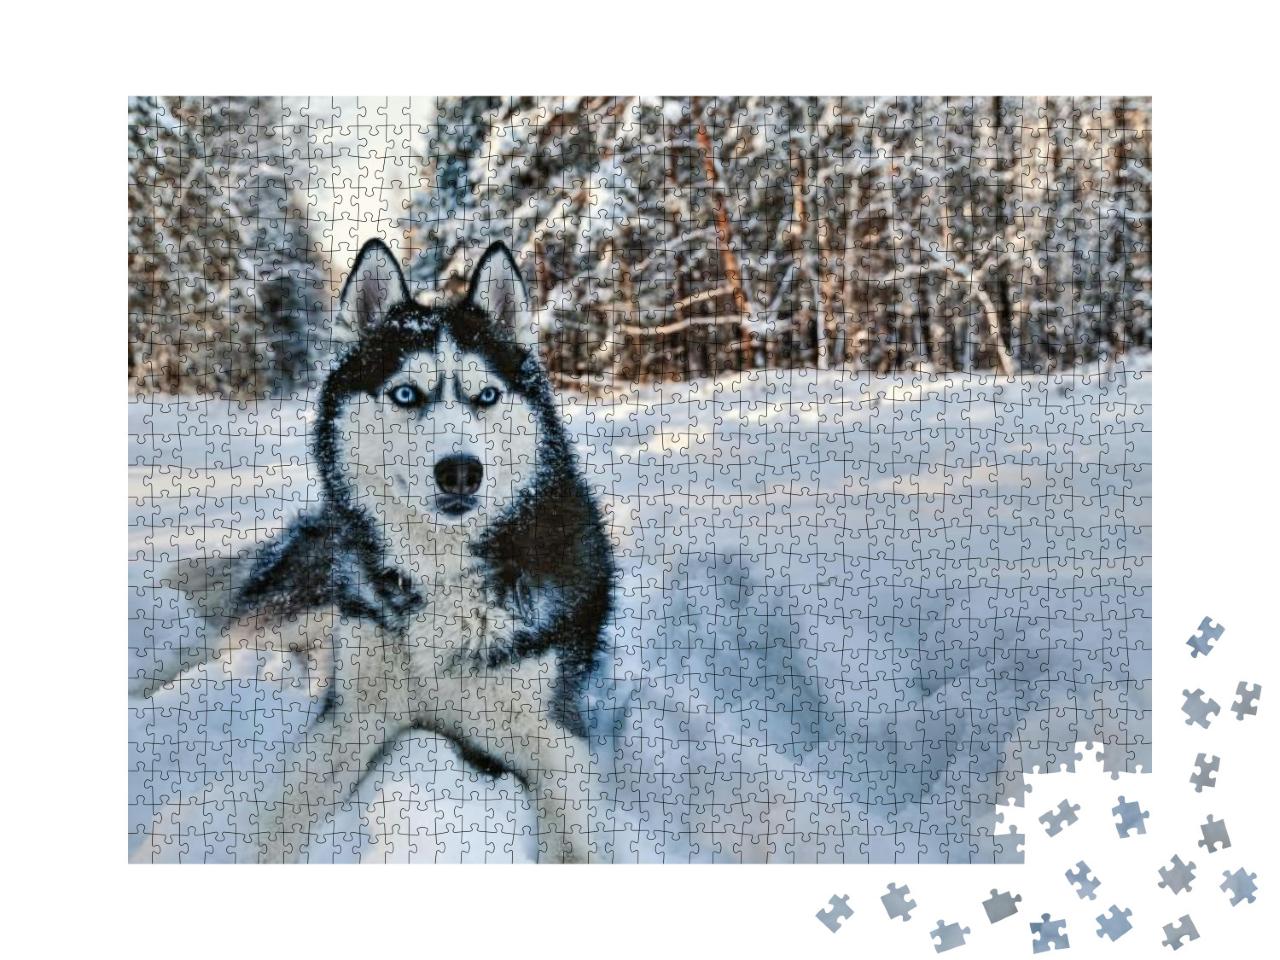 Husky Dog Lying in the Snow. Black & White Siberian Husky... Jigsaw Puzzle with 1000 pieces